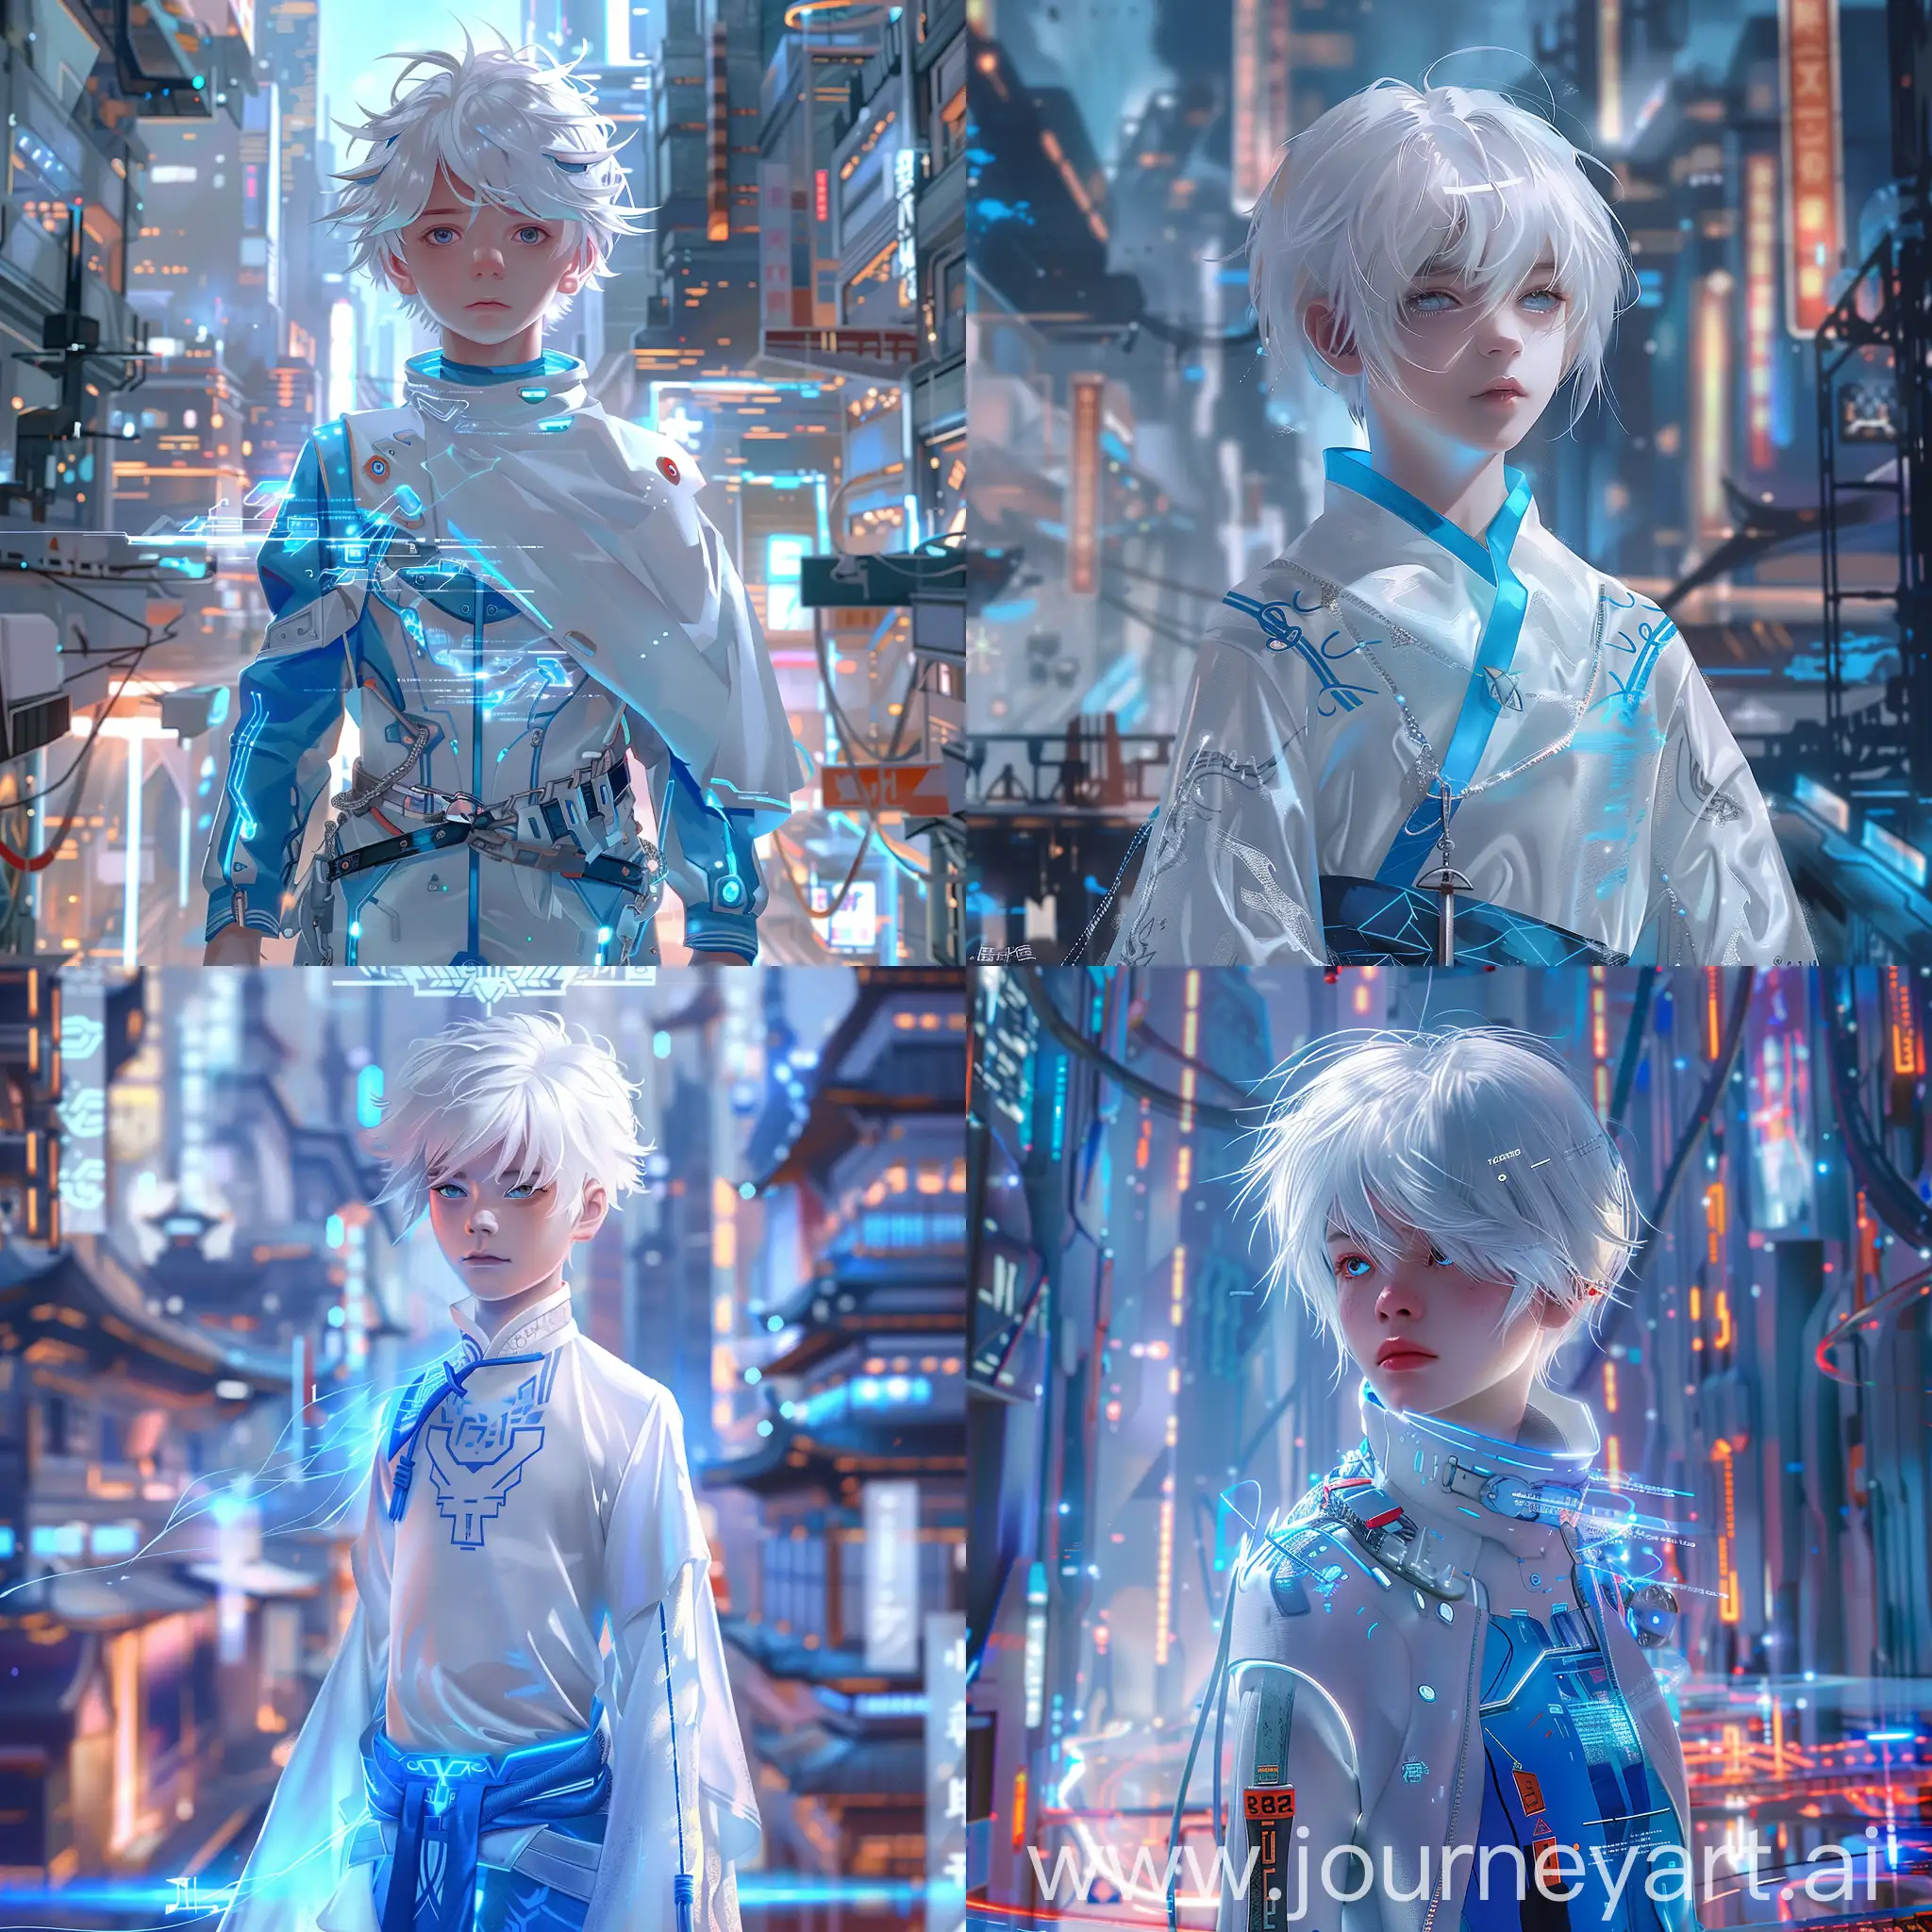 Highest image quality, outstanding details, ultra-high resolution, (realism: 1.4), the best illustration, favor details, highly condensed 1boy, with a delicate face, dressed in a white and blue modern clothes, white hair, the background is a high-tech lighting scene of the future city.